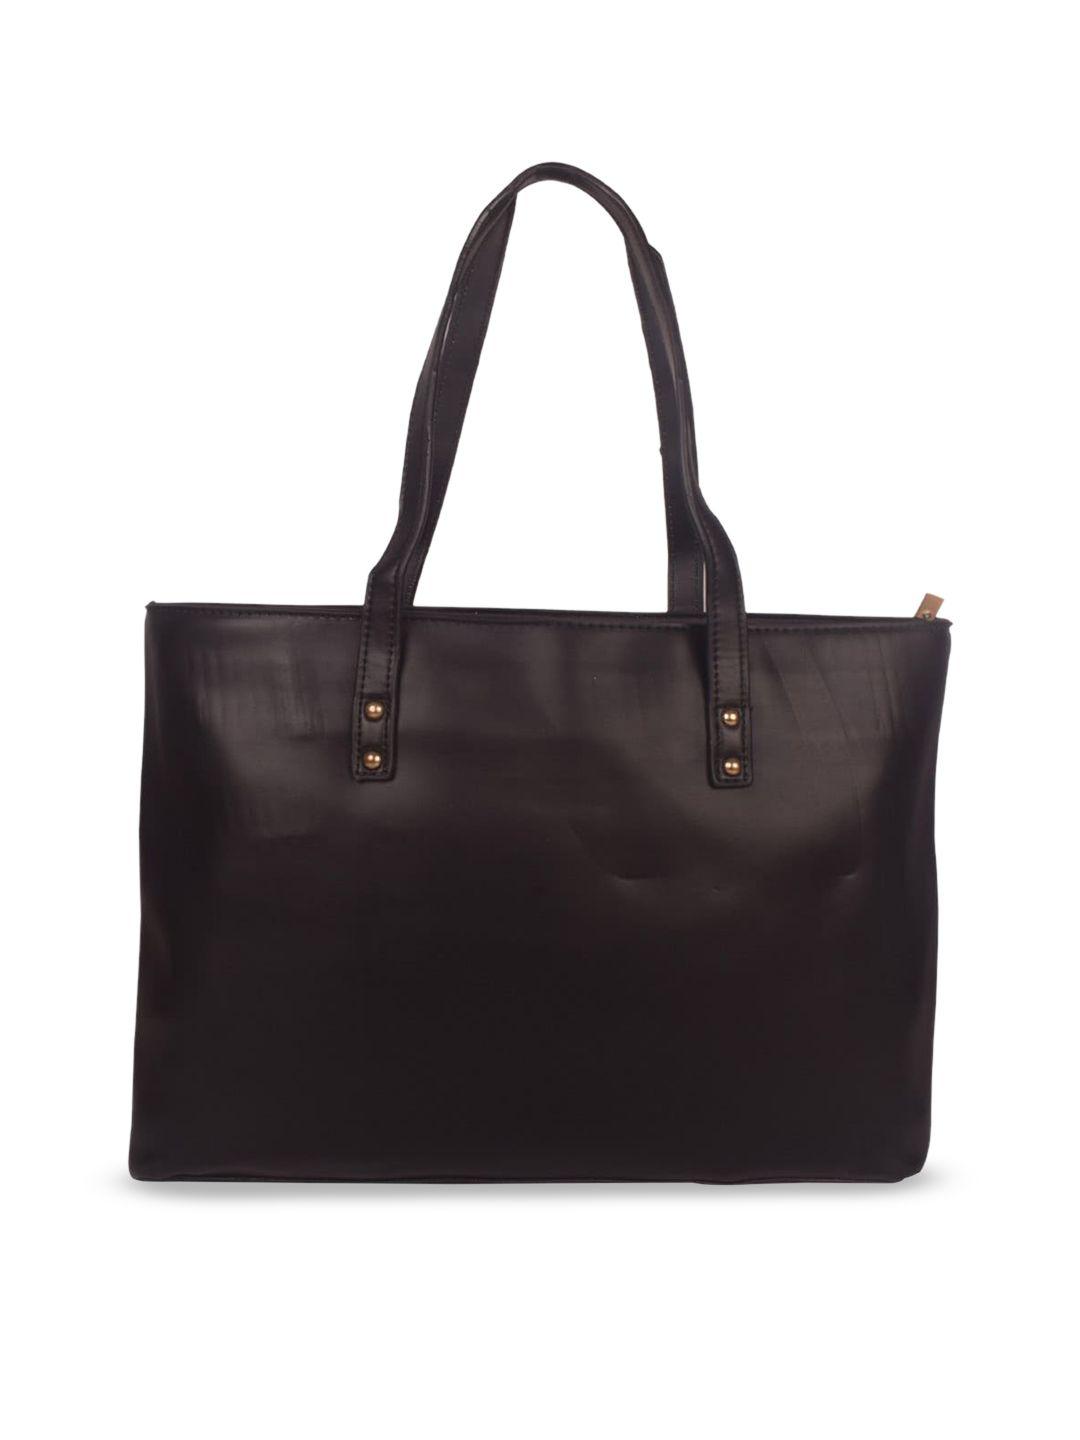 bagkok black pu structured handheld bag with bow detail